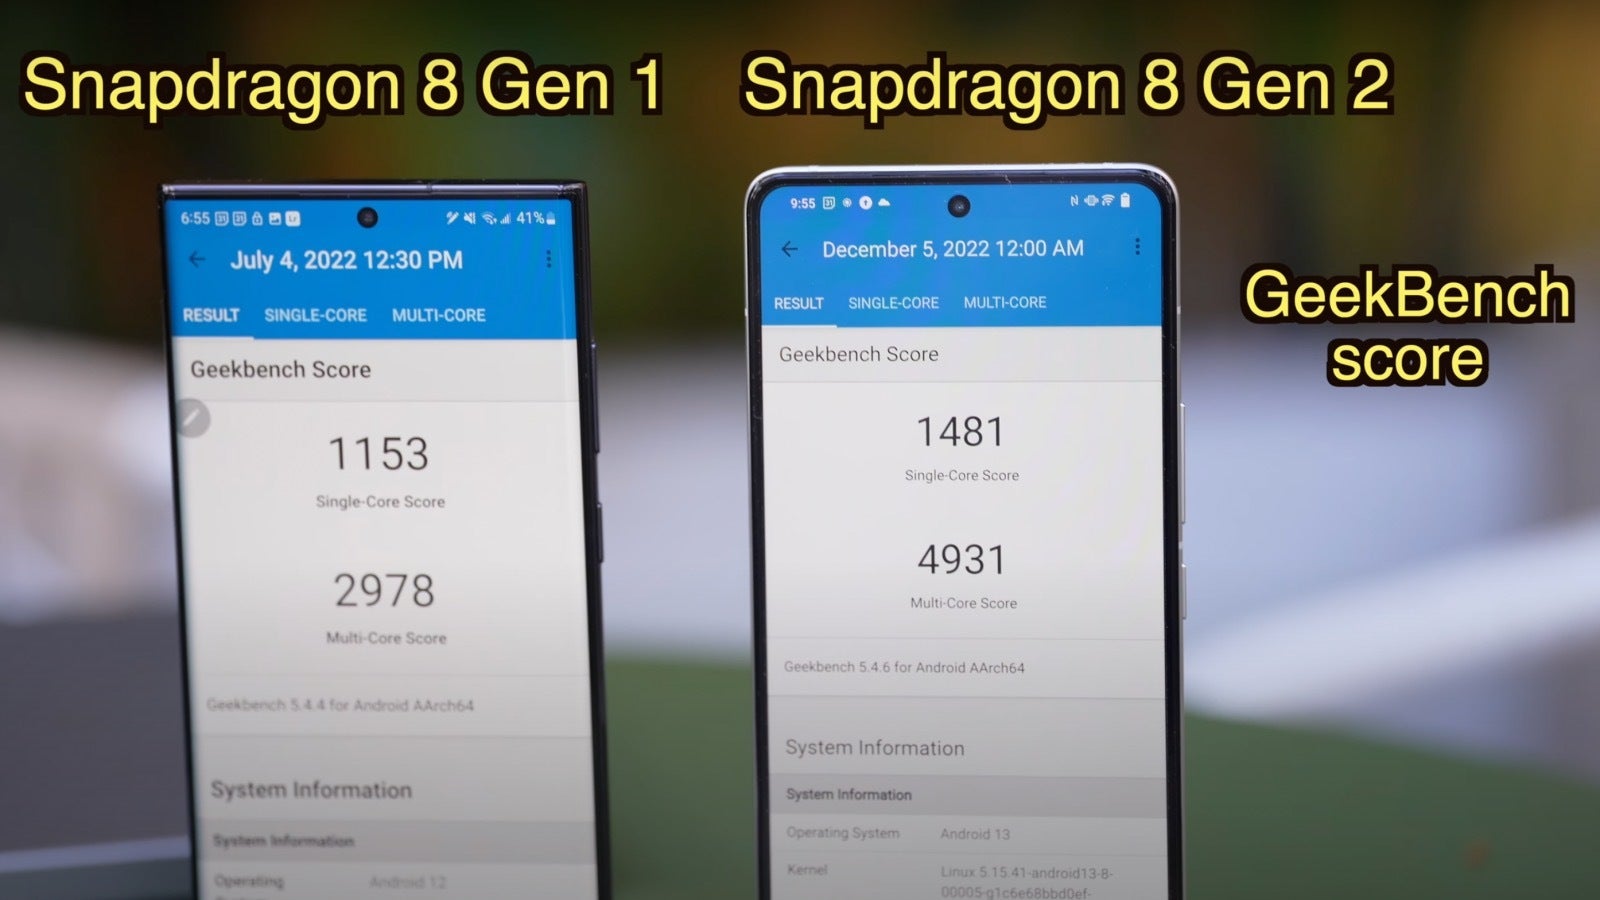 Snapdragon 8 Gen 2 benchmarks leave no chance to Google&#039;s Pixel 7 - image courtesy of Ben Sin. - Power over brains! Super-charged Galaxy S23 to run circles around Pixel 7; Tensor 2 left in the dust